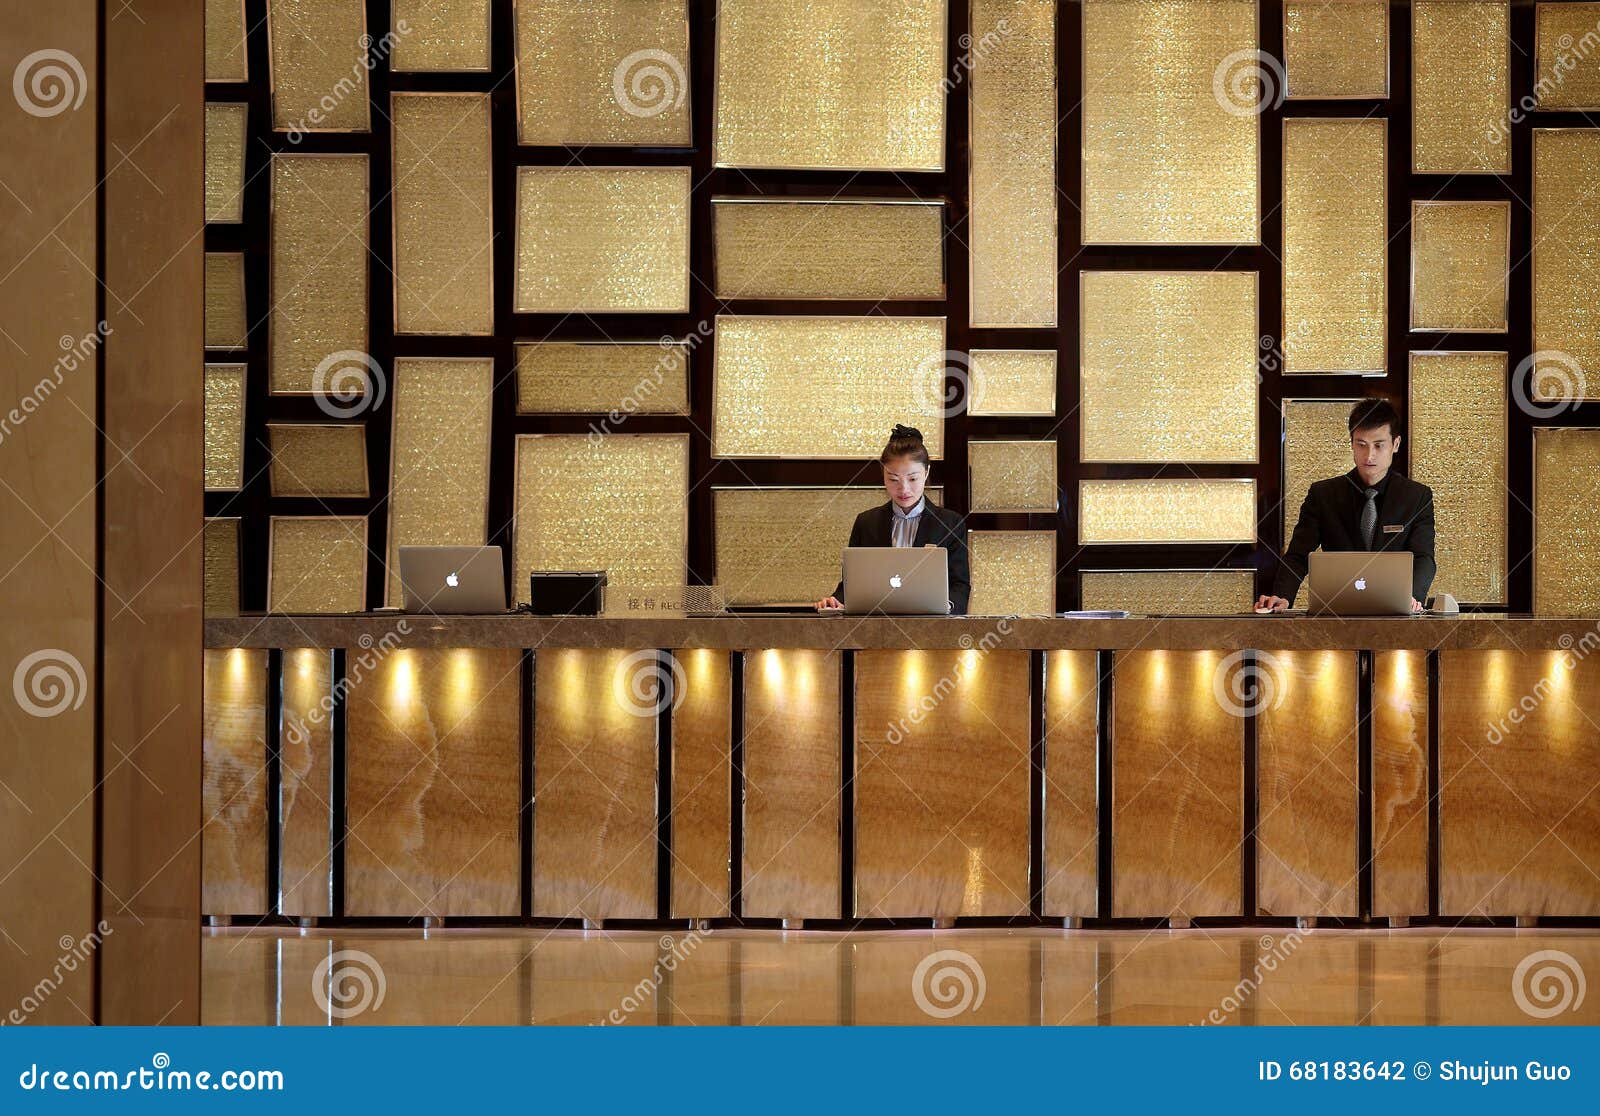 The Hotel Reception Desk Editorial Photography Image Of Window